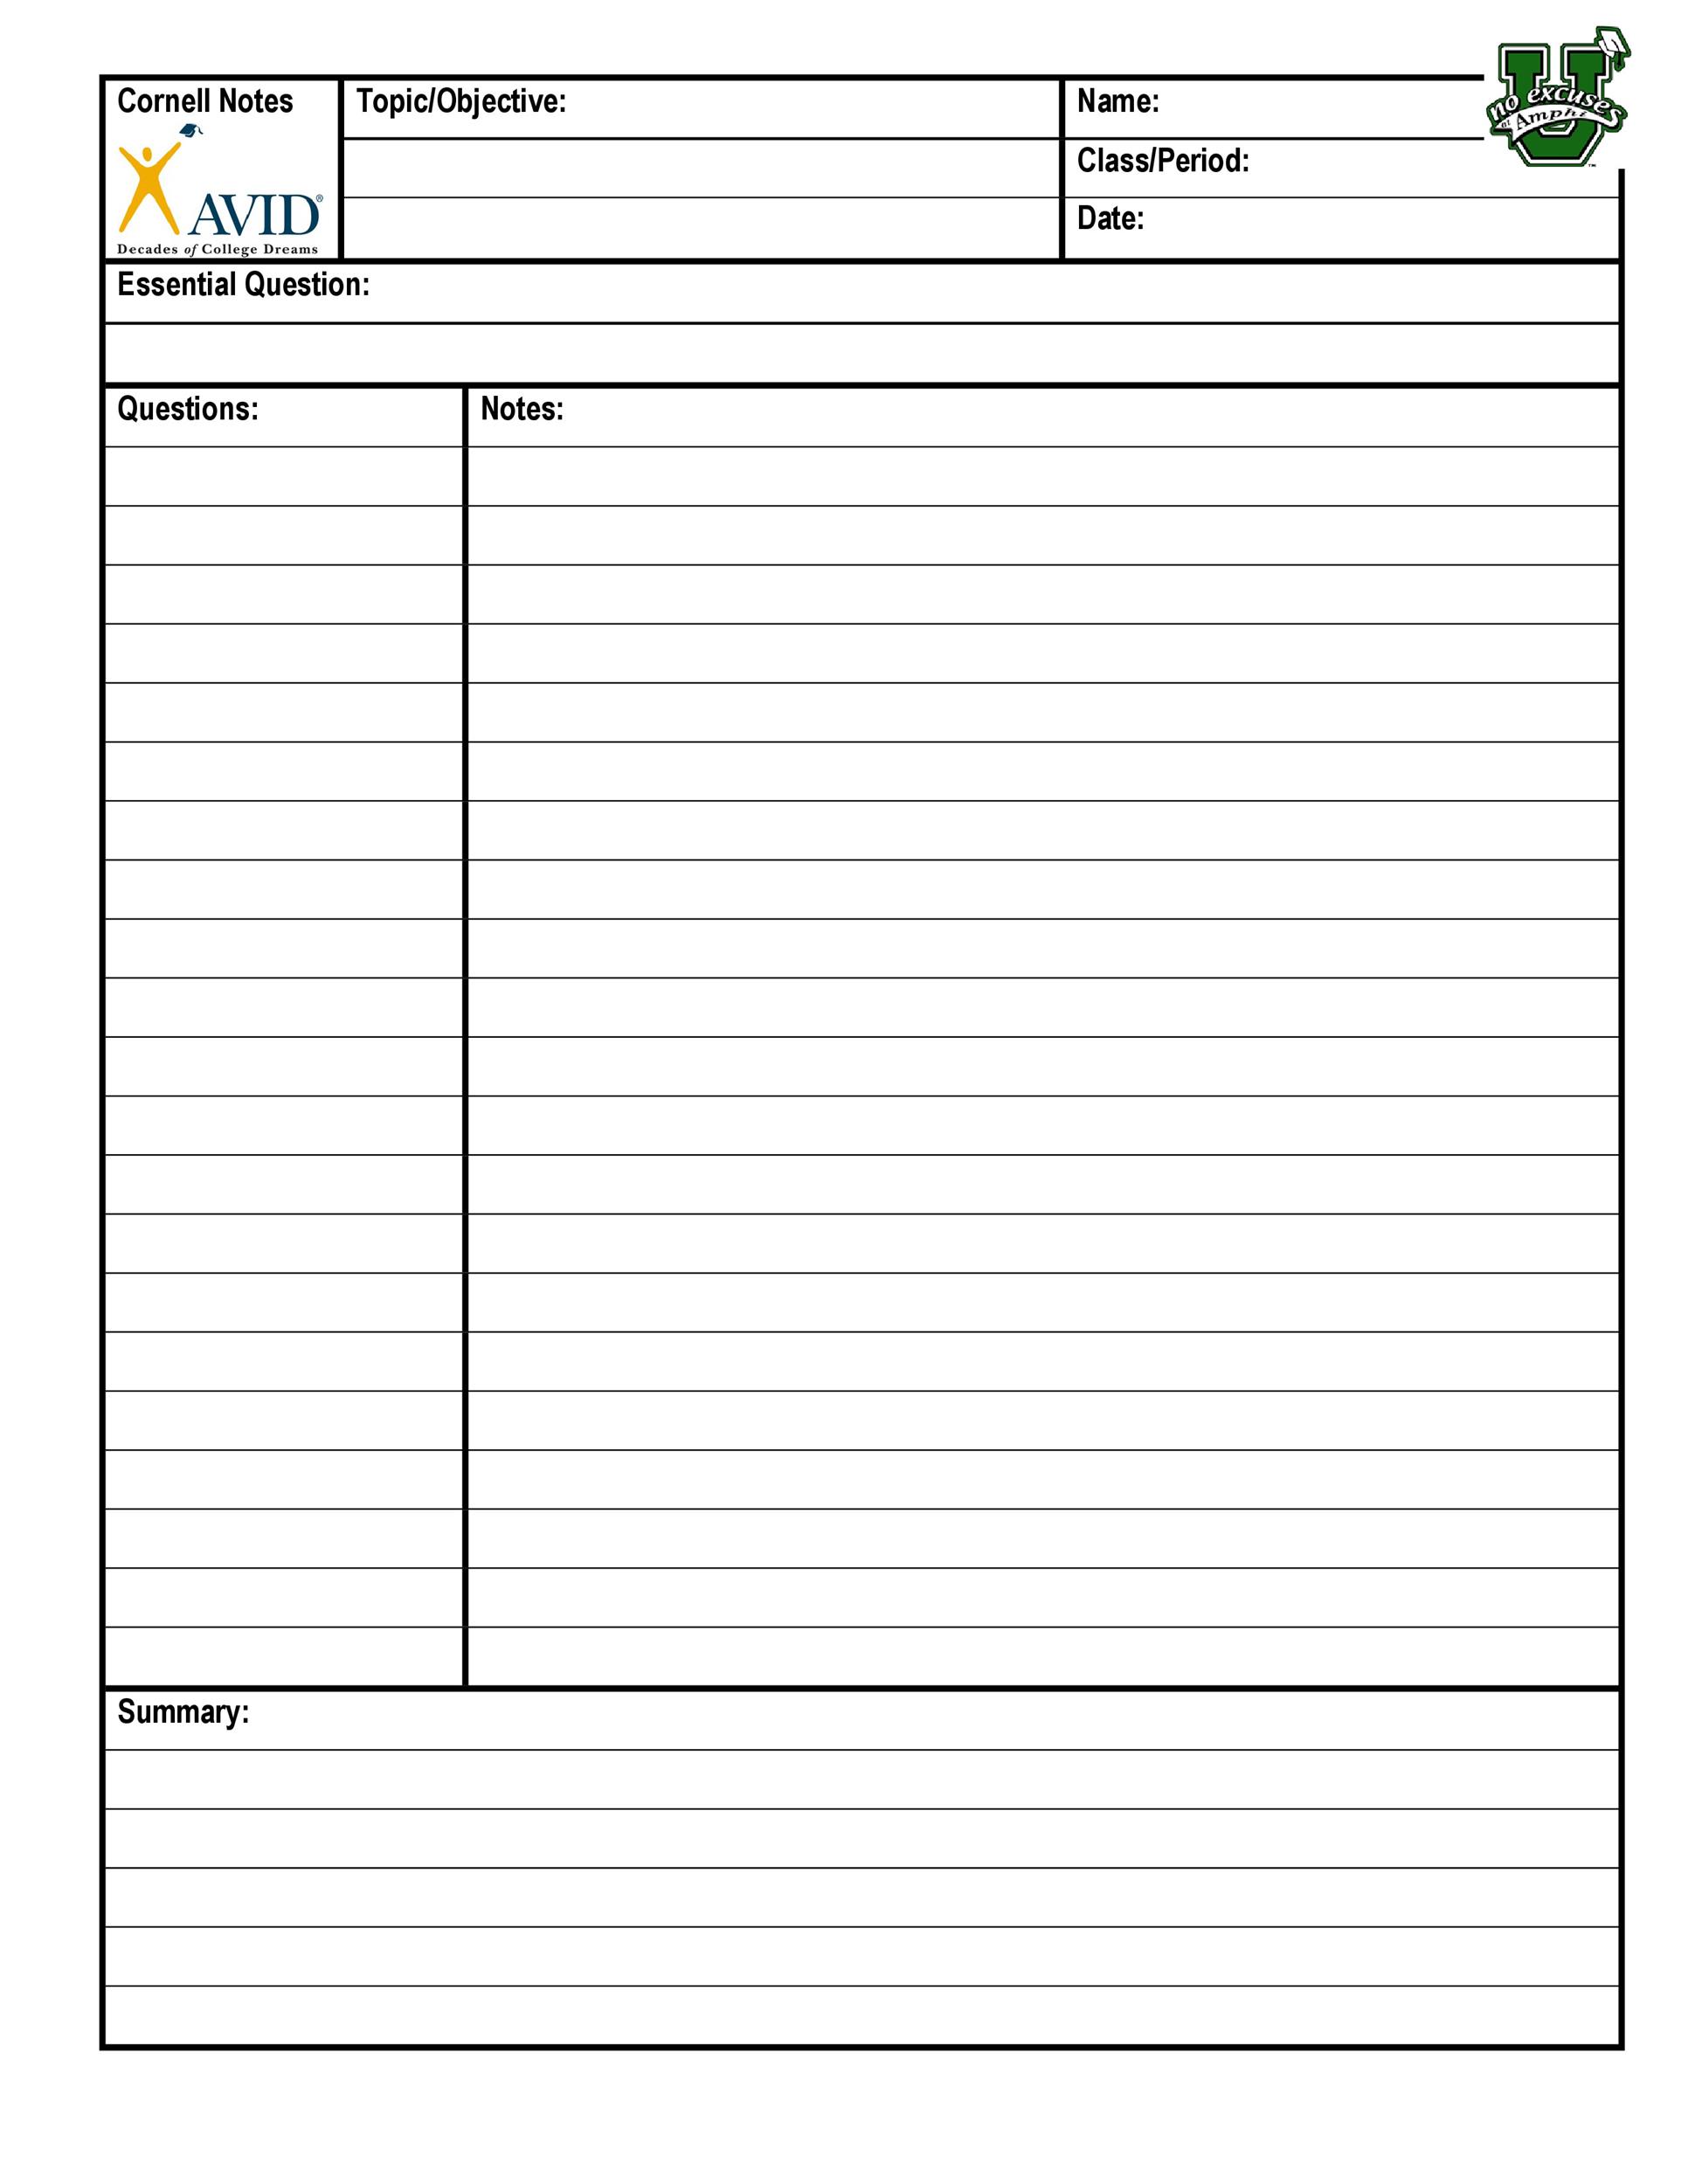 Cornell Notes Template Evernote For Mac Pertaining To Cornell Notes Template Word Document